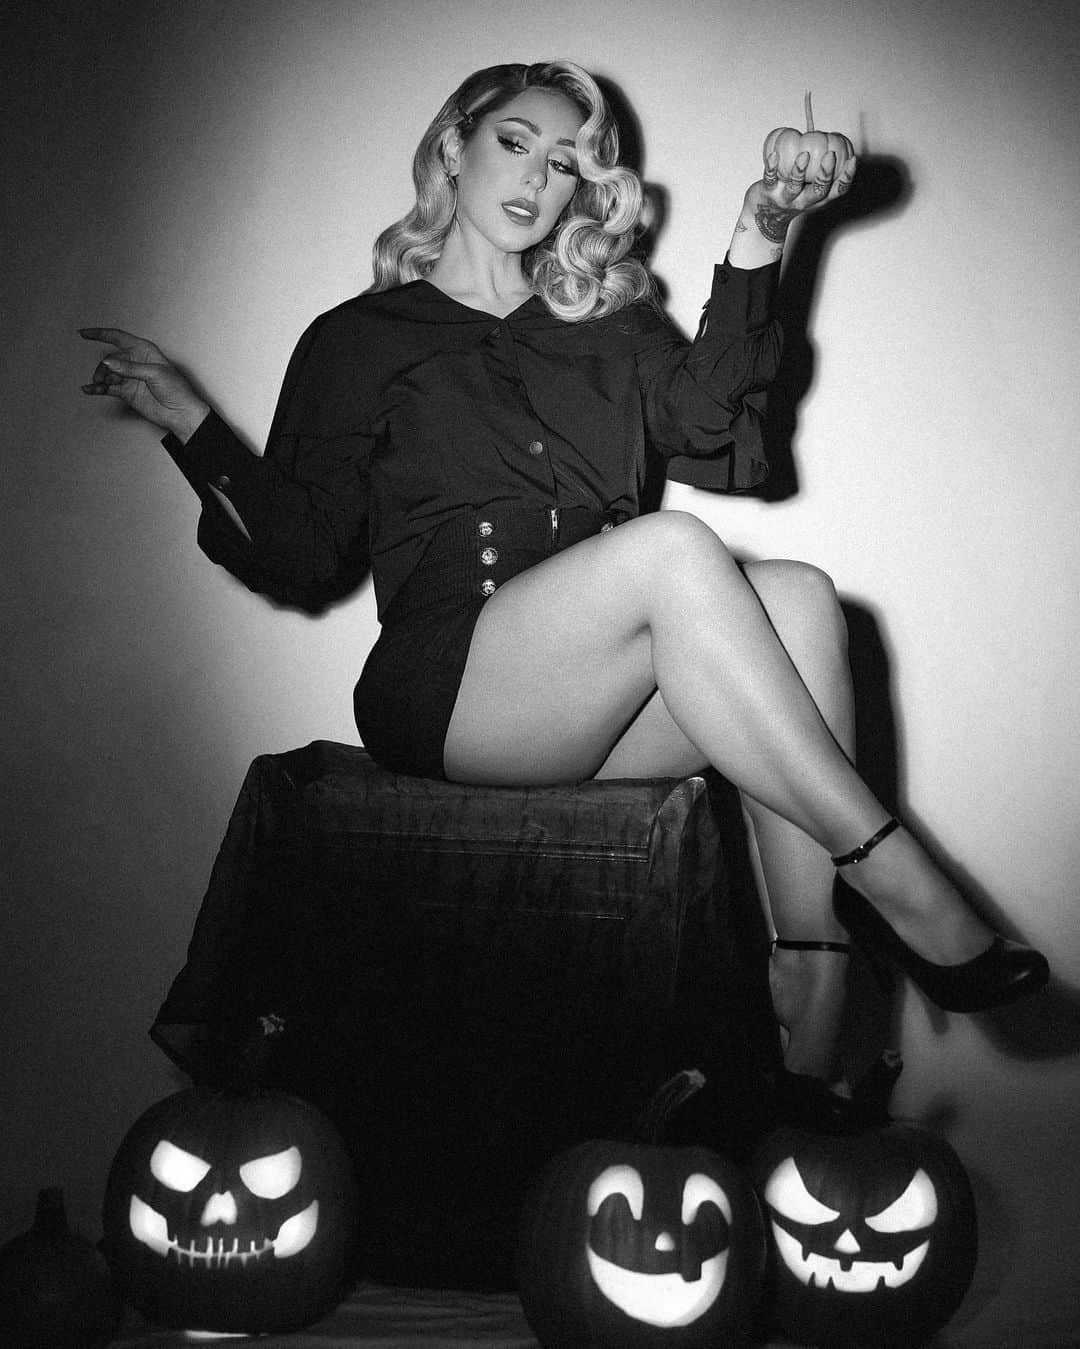 Chrisspyのインスタグラム：「Happy Halloween 🎃  Photos by @samhodgesphoto  We had so much fun creating these vintage inspired spooky images! More pics coming soon 👻🎃 @freedomcoutureofficial wig styled by me 💙」